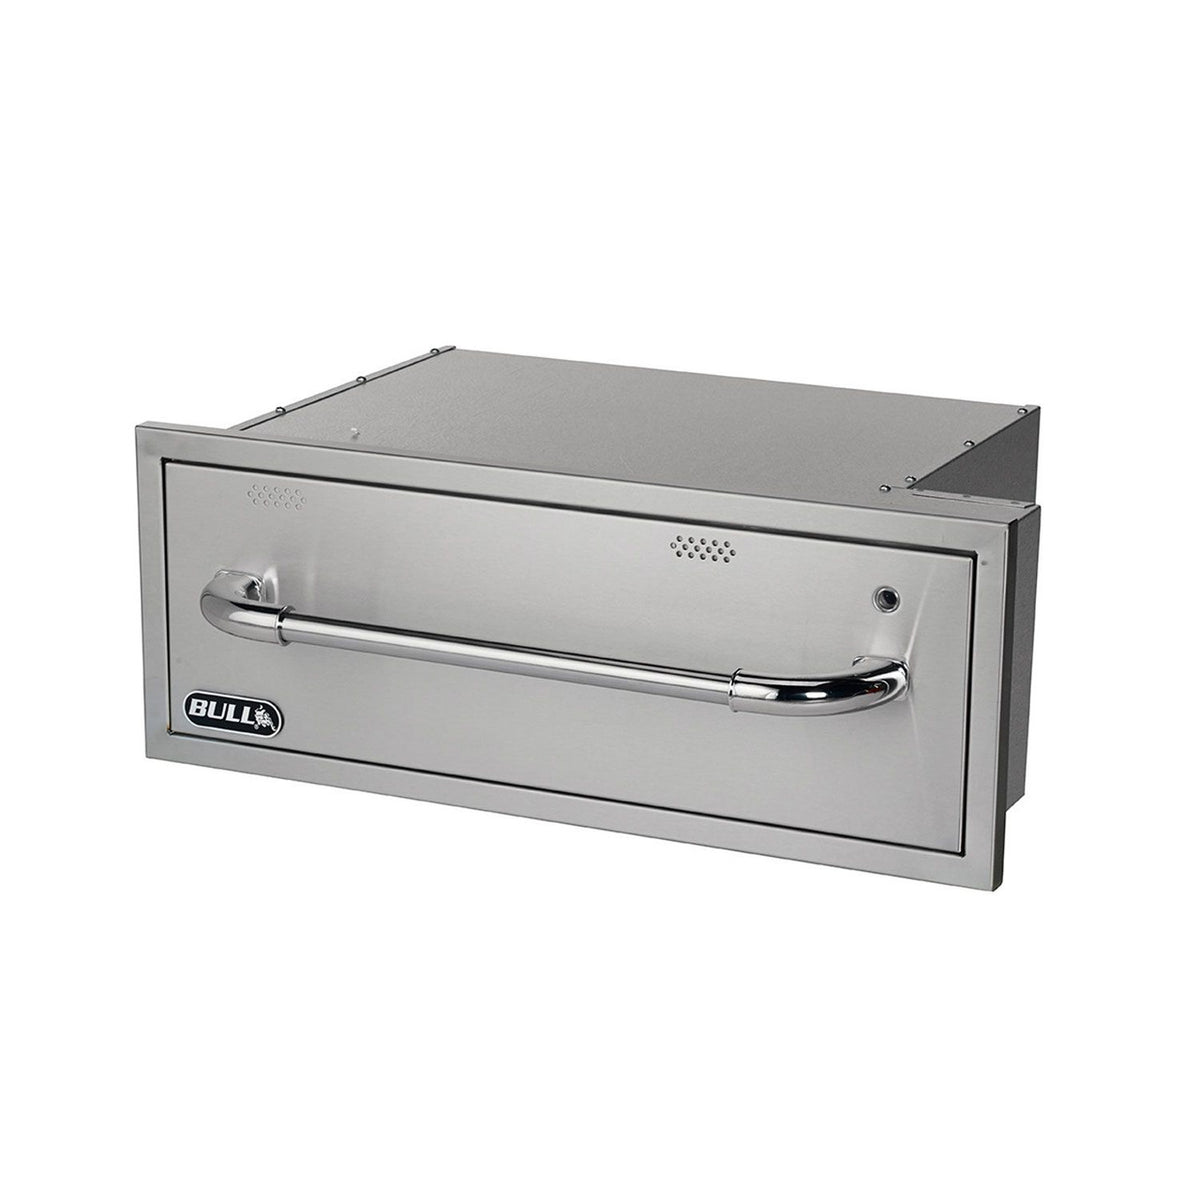 Bull 30 Inch Built-In 110V Electric Stainless Steel Warming Drawer